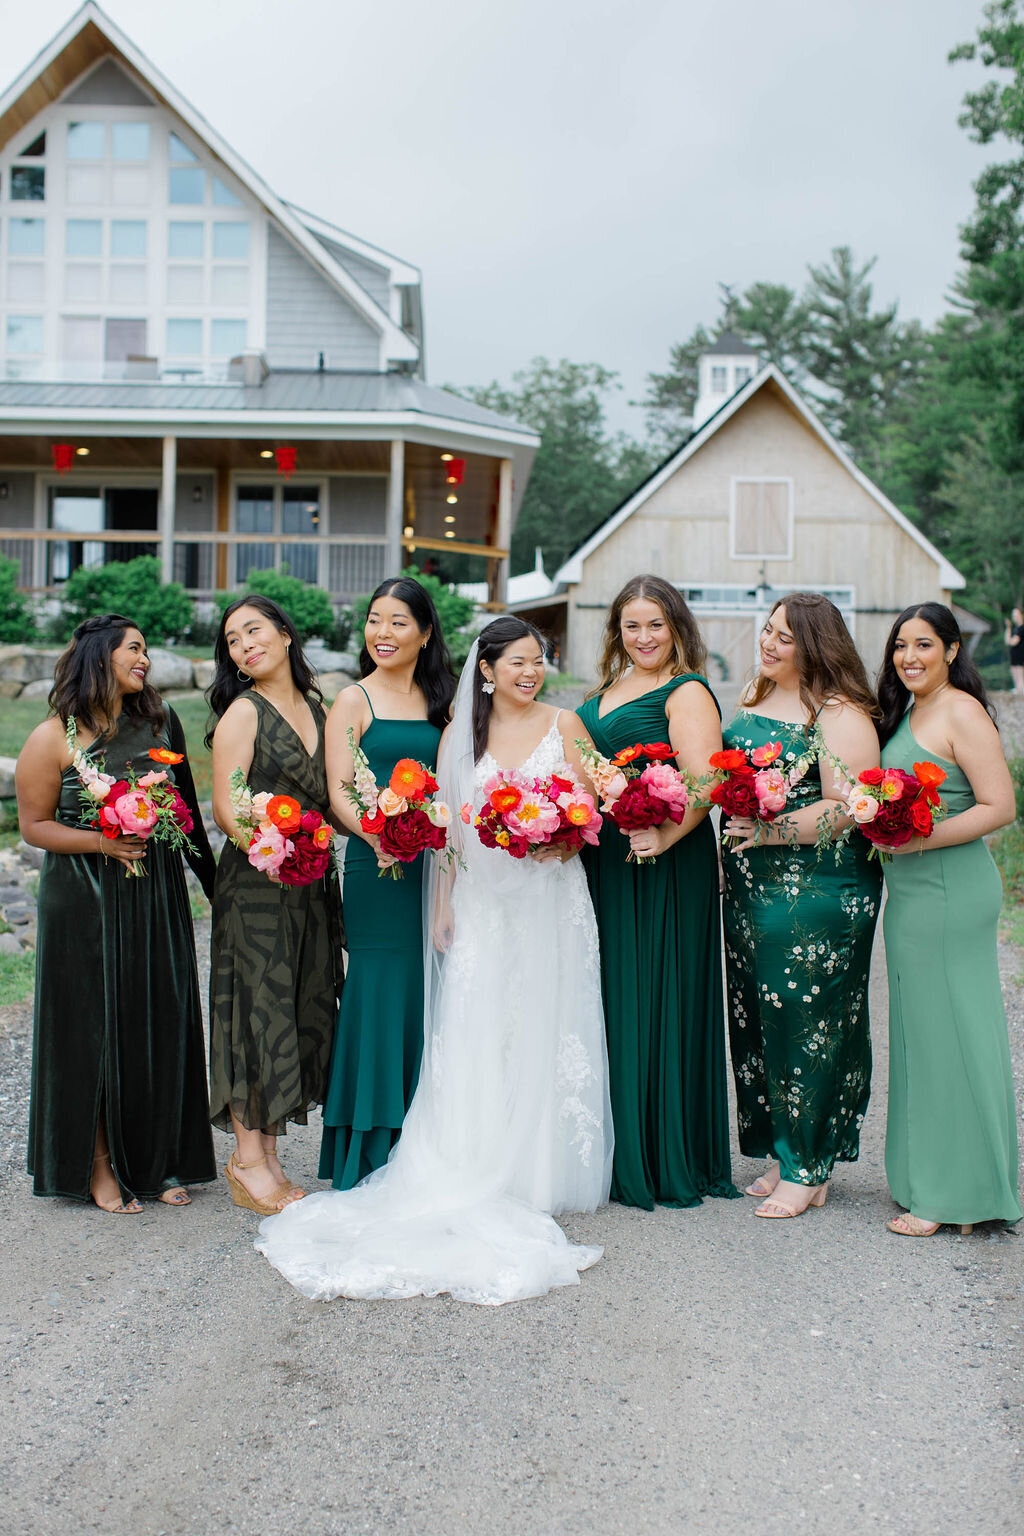 New England Bridal Party with green dresses and colorful florals